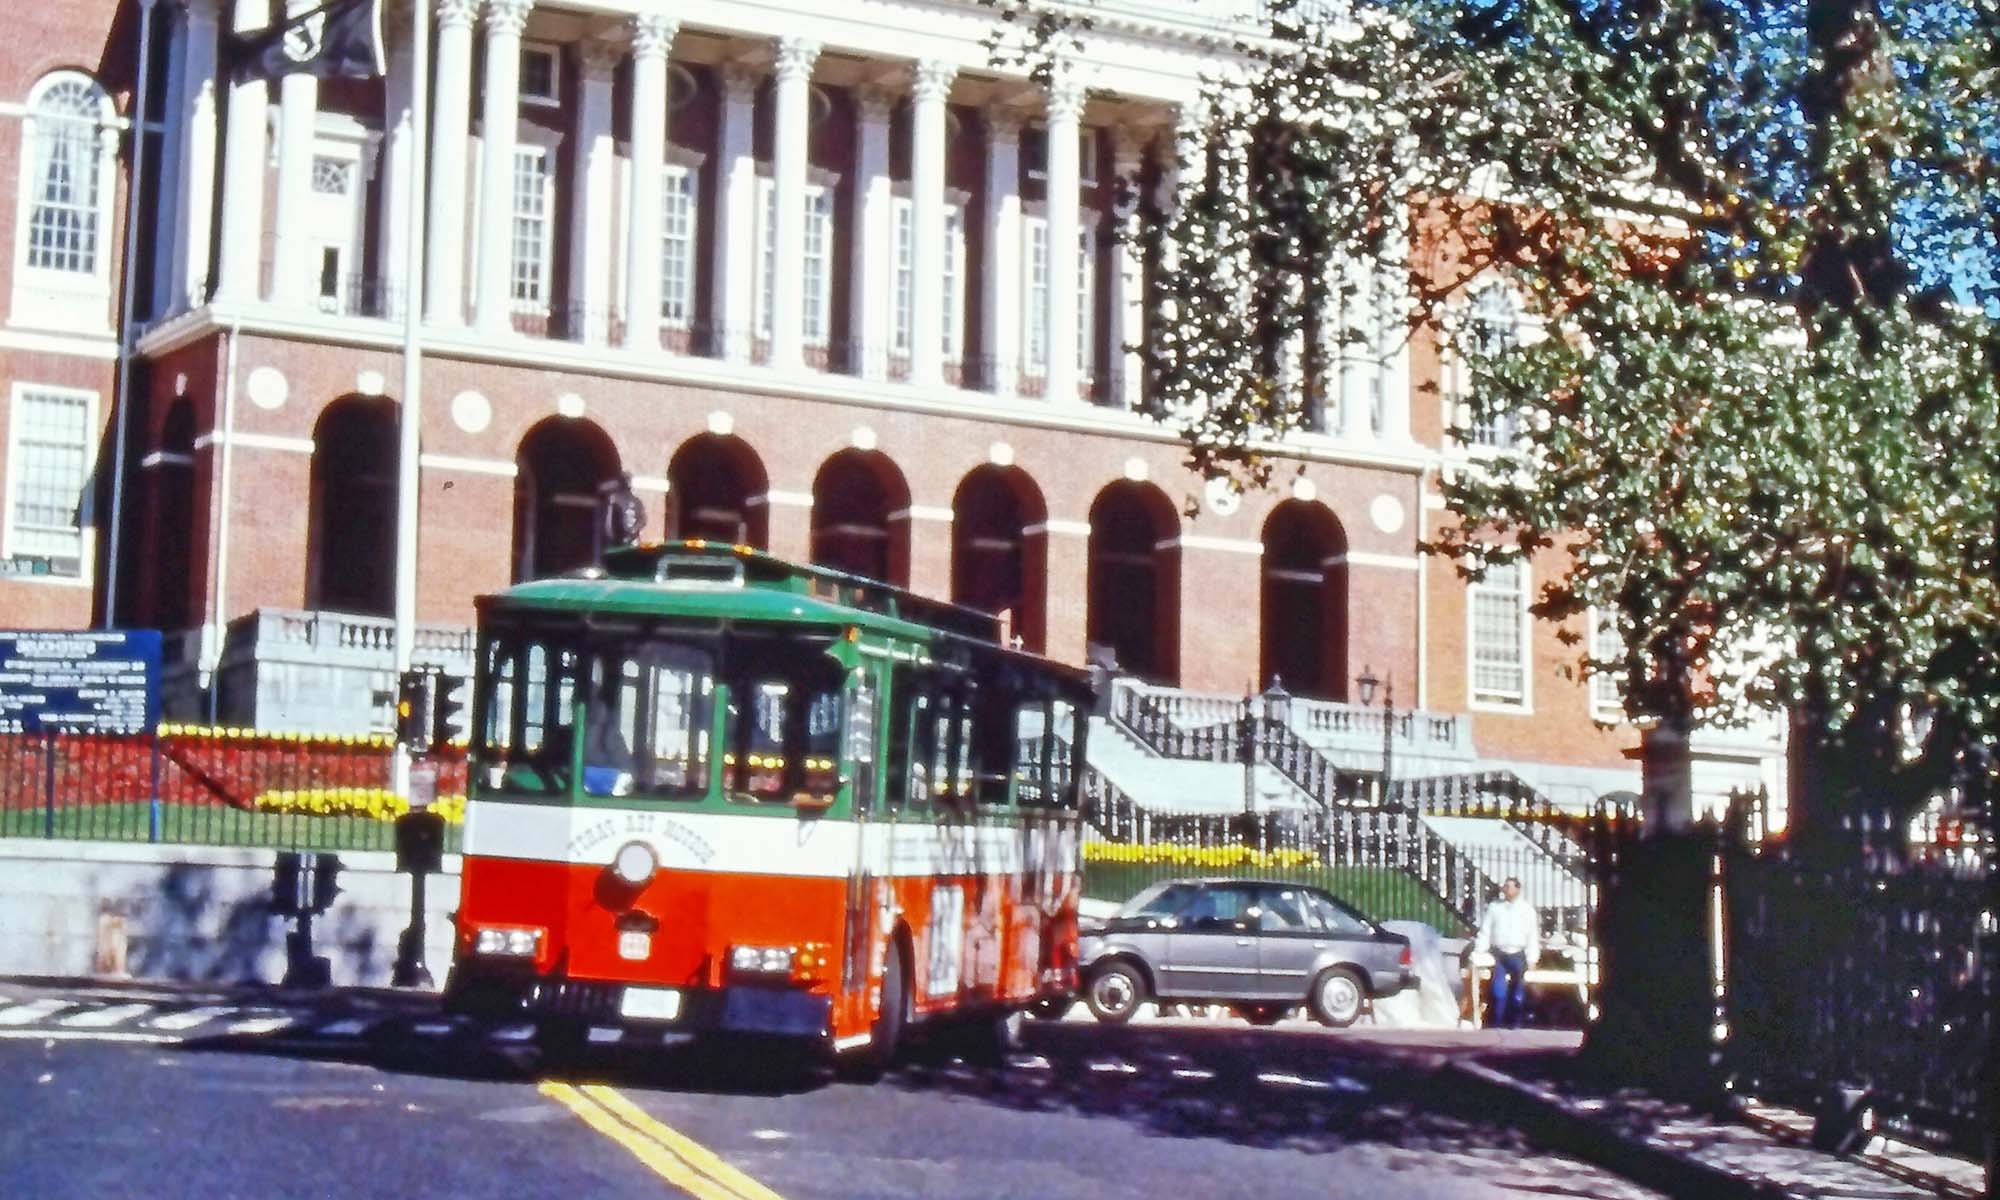 Boston trolley at state house